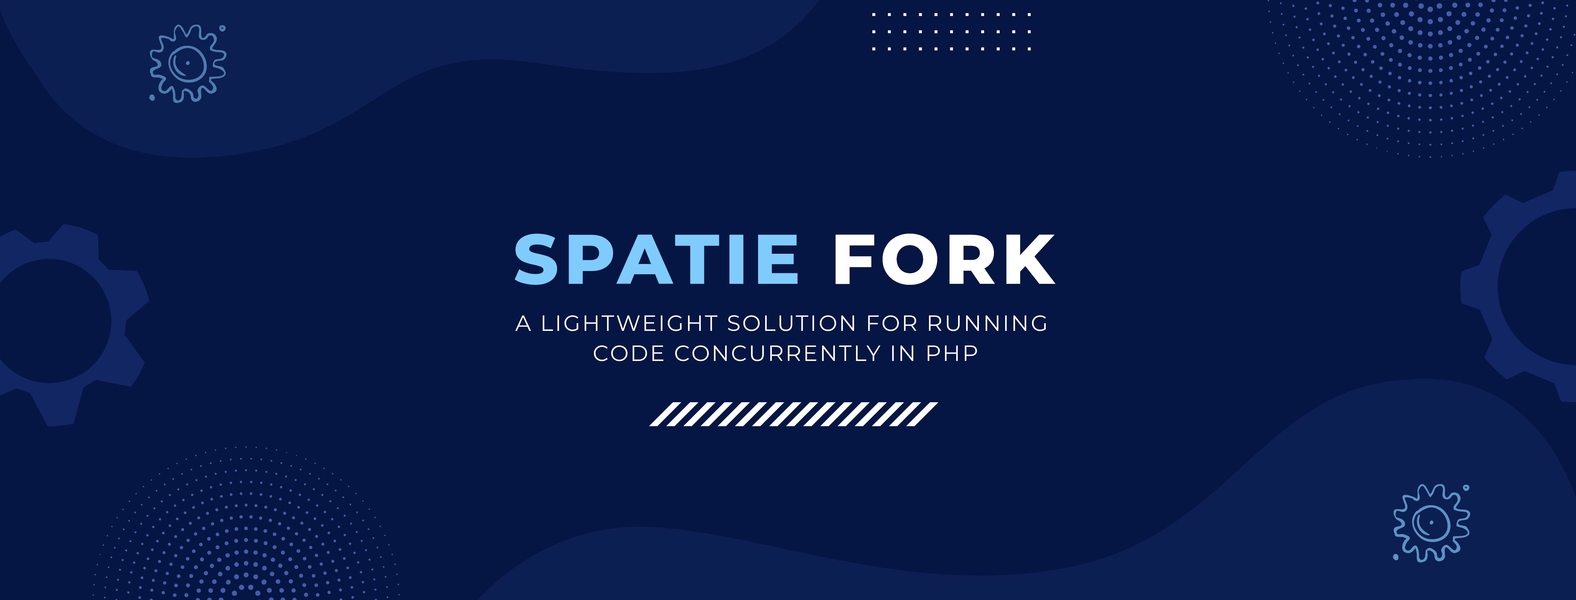 A lightweight solution for running code concurrently in PHP cover image